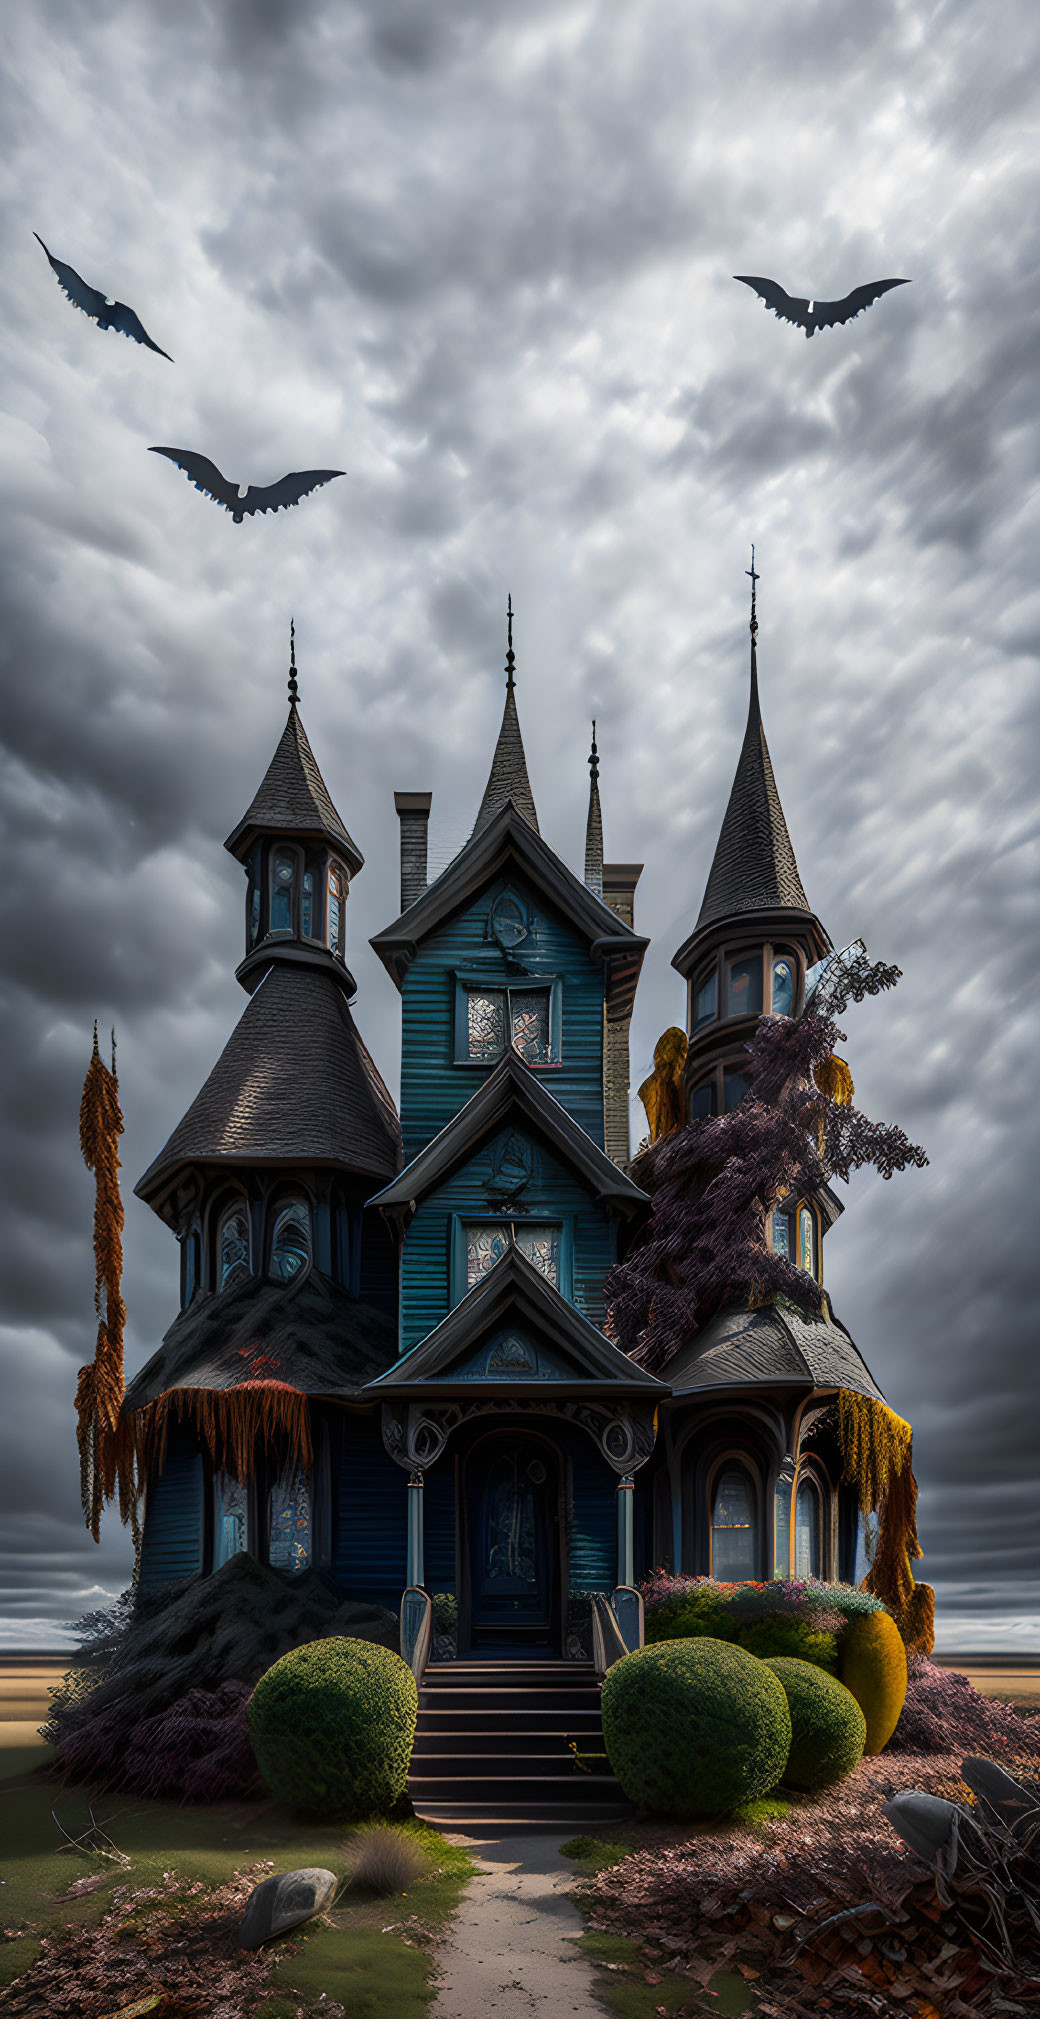 Eerie Victorian house with flying bats and purple foliage